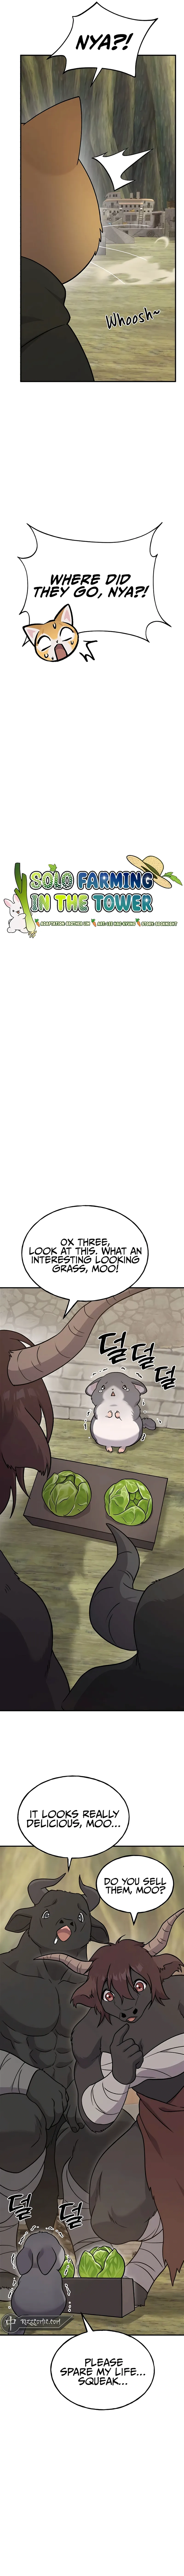 Solo Farming In The Tower Chapter 43 page 3